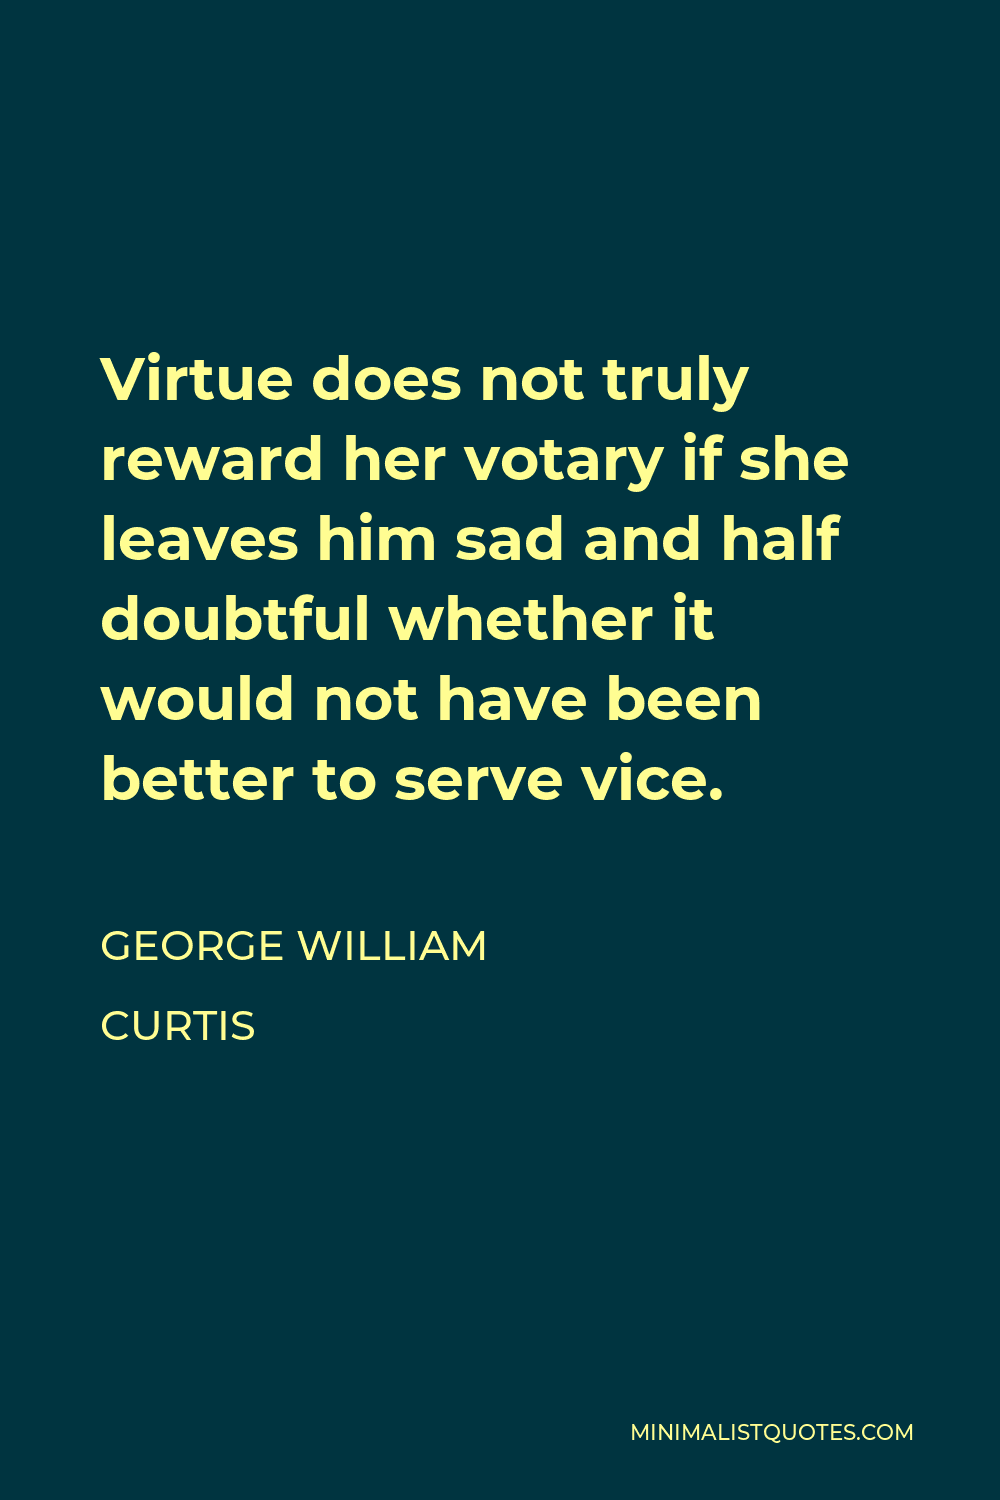 George William Curtis Quote - Virtue does not truly reward her votary if she leaves him sad and half doubtful whether it would not have been better to serve vice.